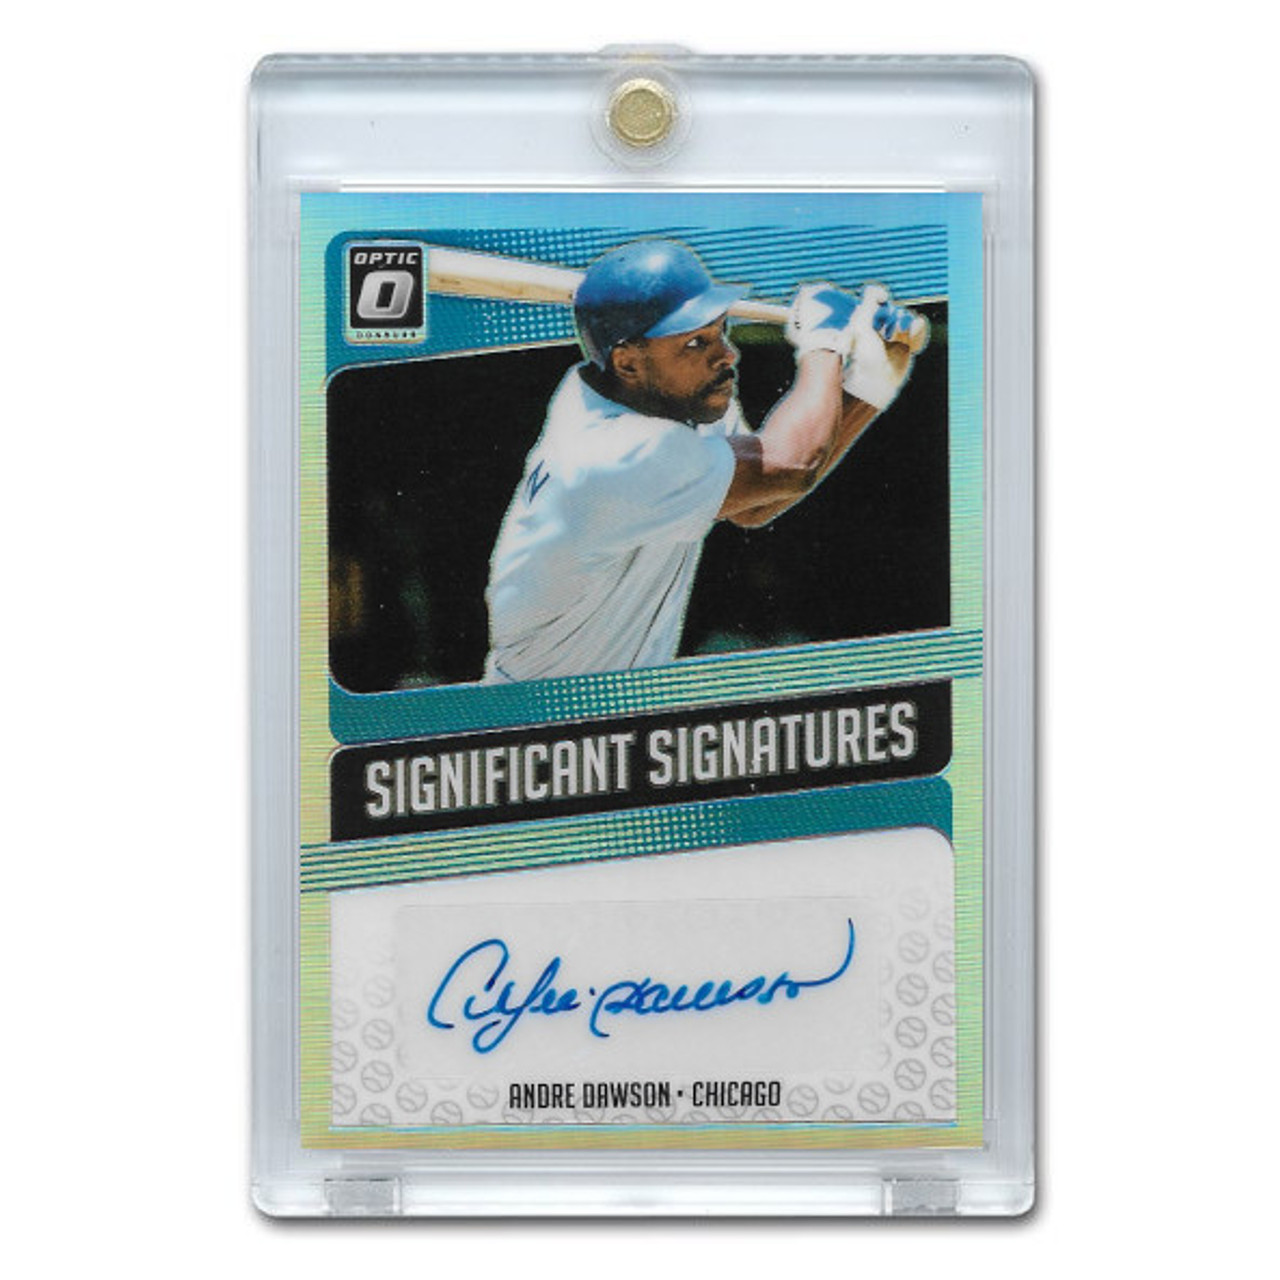 Andre Dawson Autographed Card 2018 Donruss Optic Significant